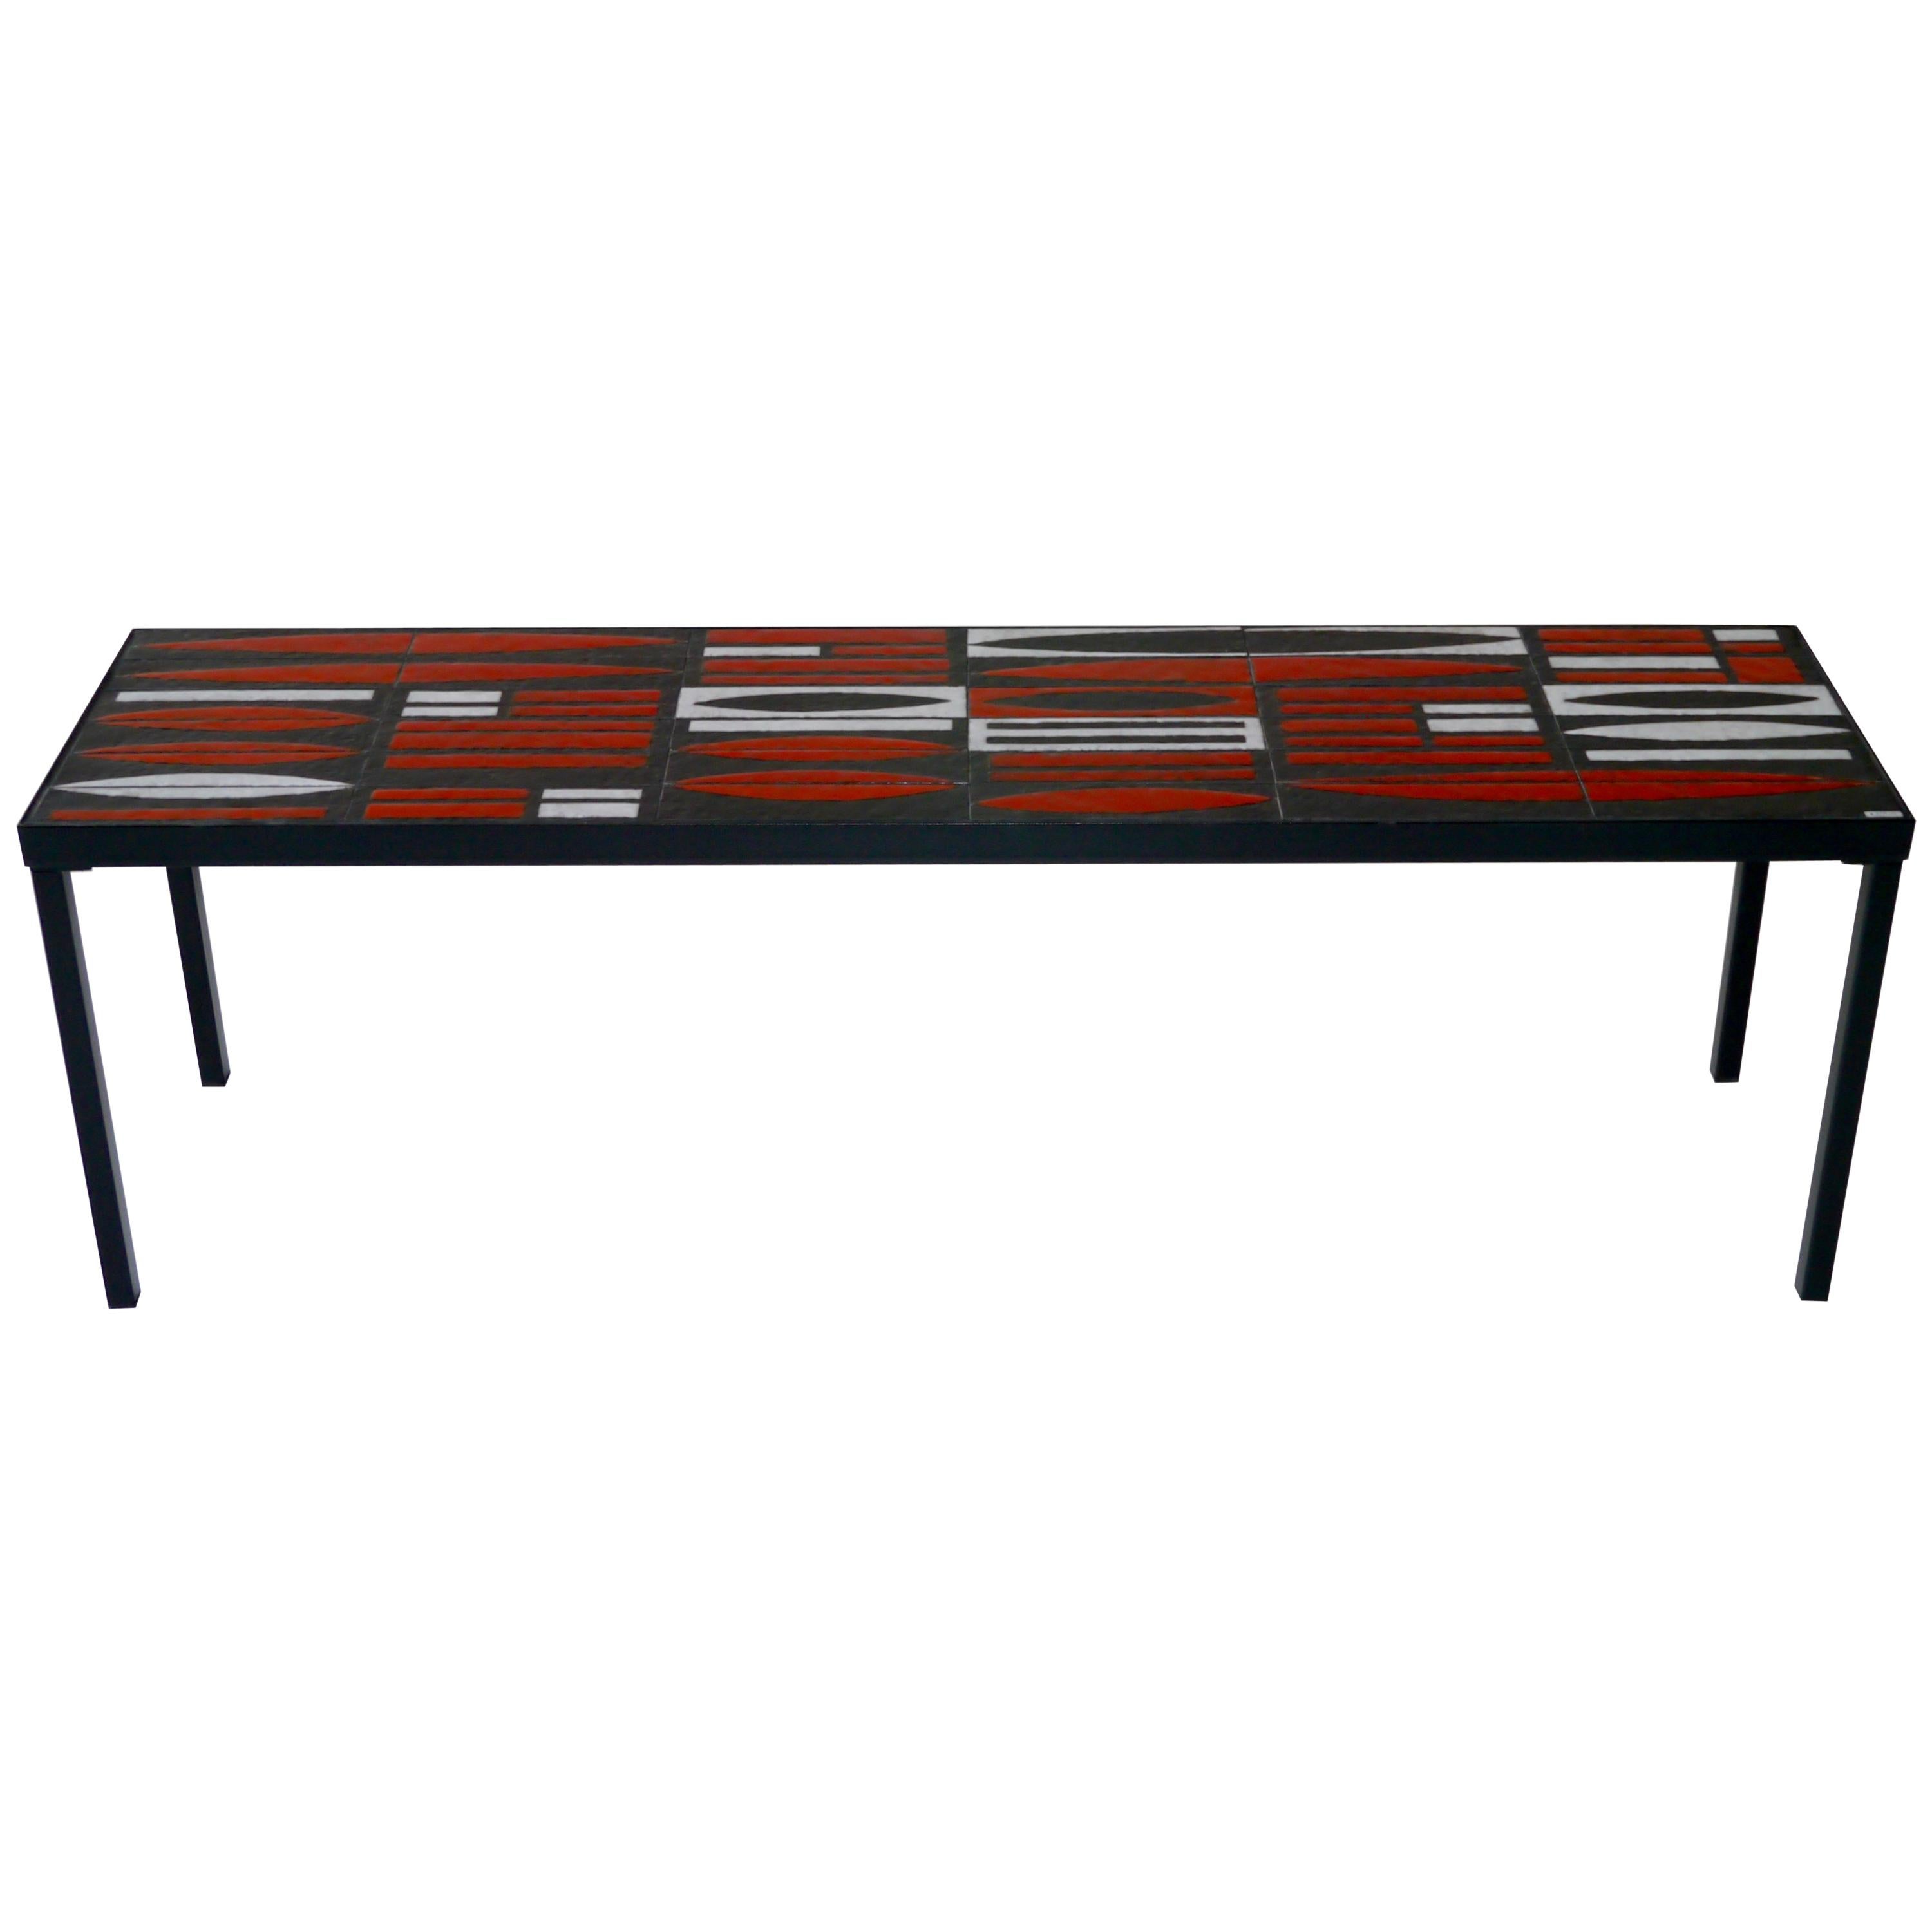 Roger Capron, Iconic "Navettes" Low Table in Red, France, circa 1960 For Sale